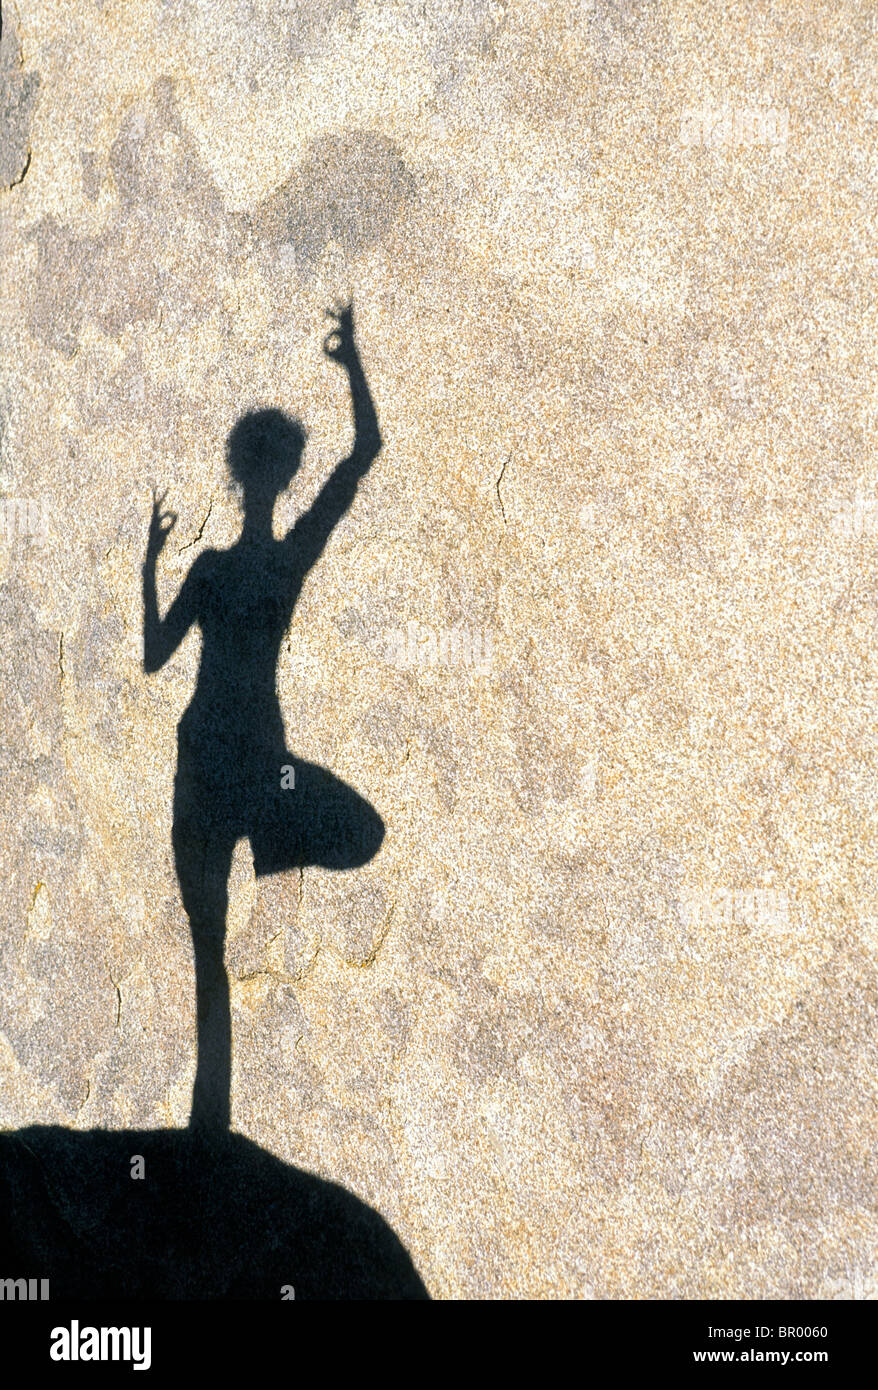 Share more than 136 shadow images of yoga poses